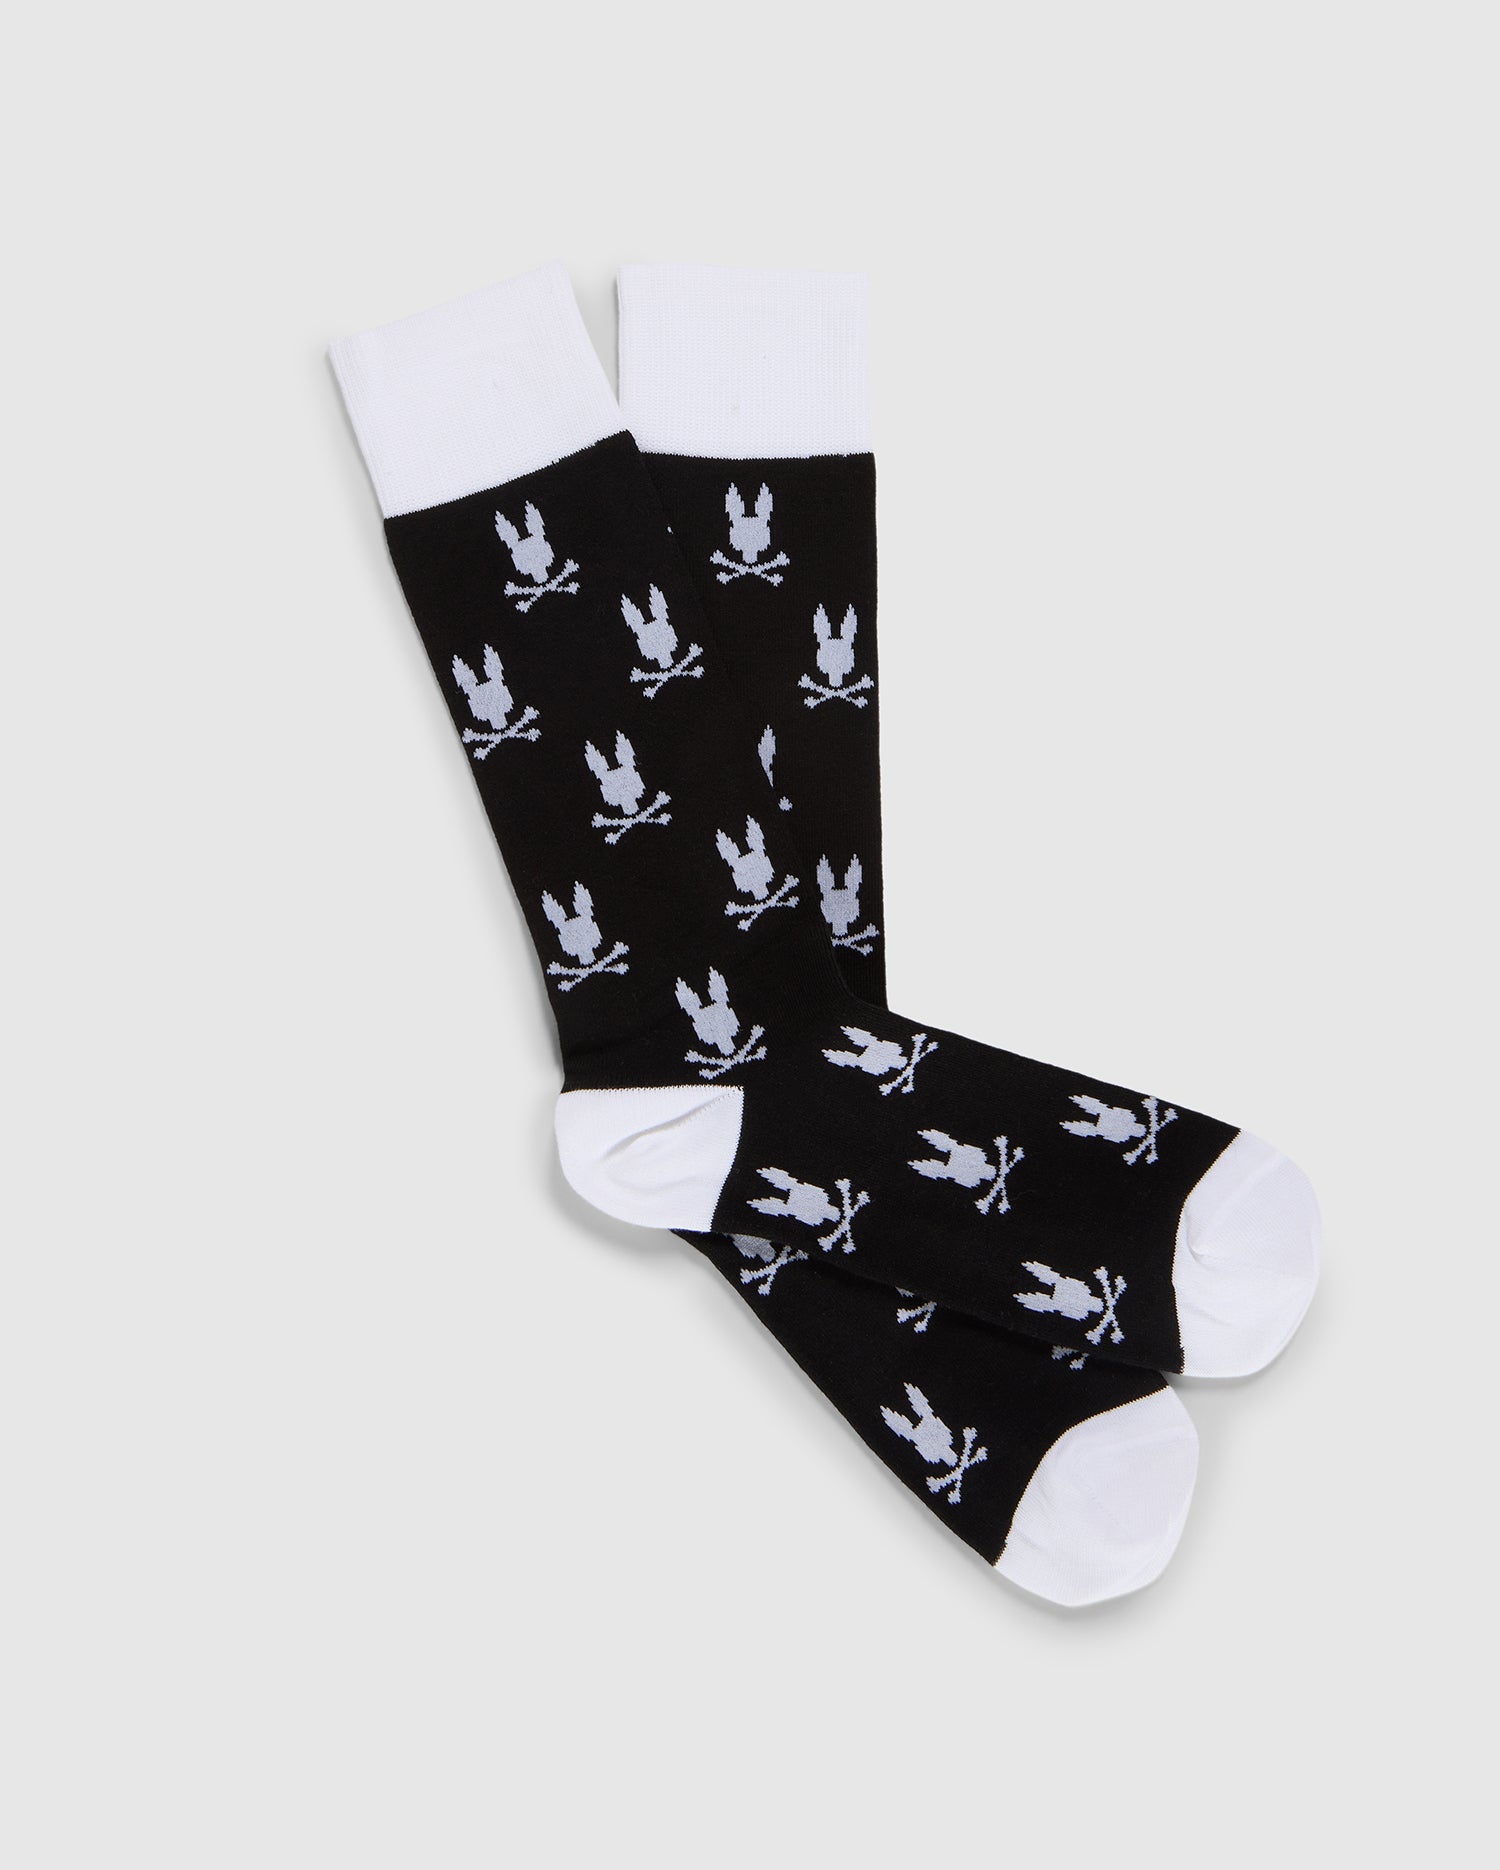 A pair of Psycho Bunny black dress socks with a pattern of white flying doves, displayed on a flat, neutral background.